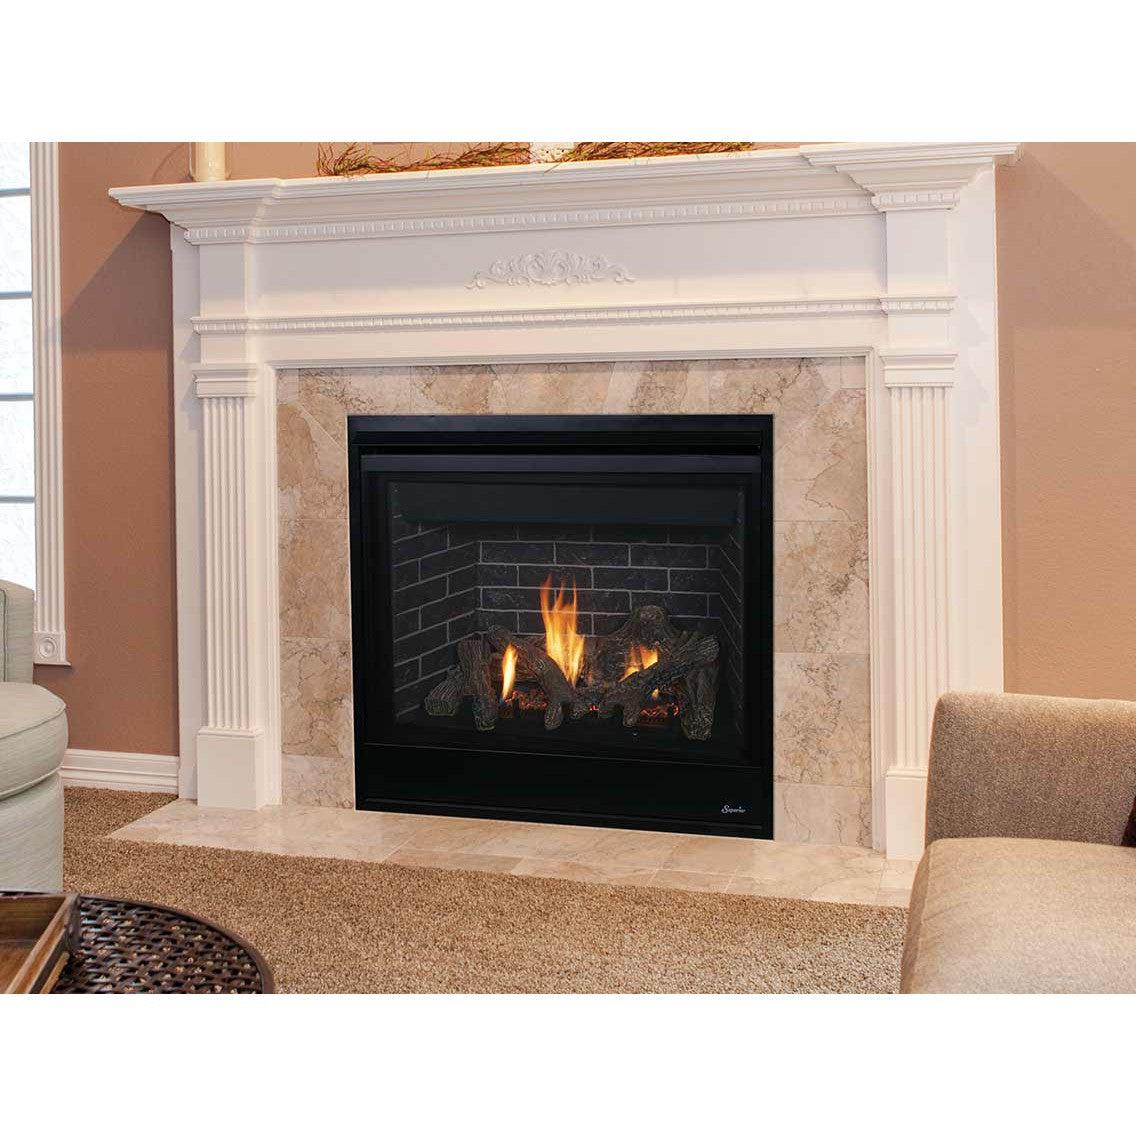 Superior DRT3035 35" Traditional Direct Top/Rear Vent Propane Gas Fireplace With Electronic Ignition